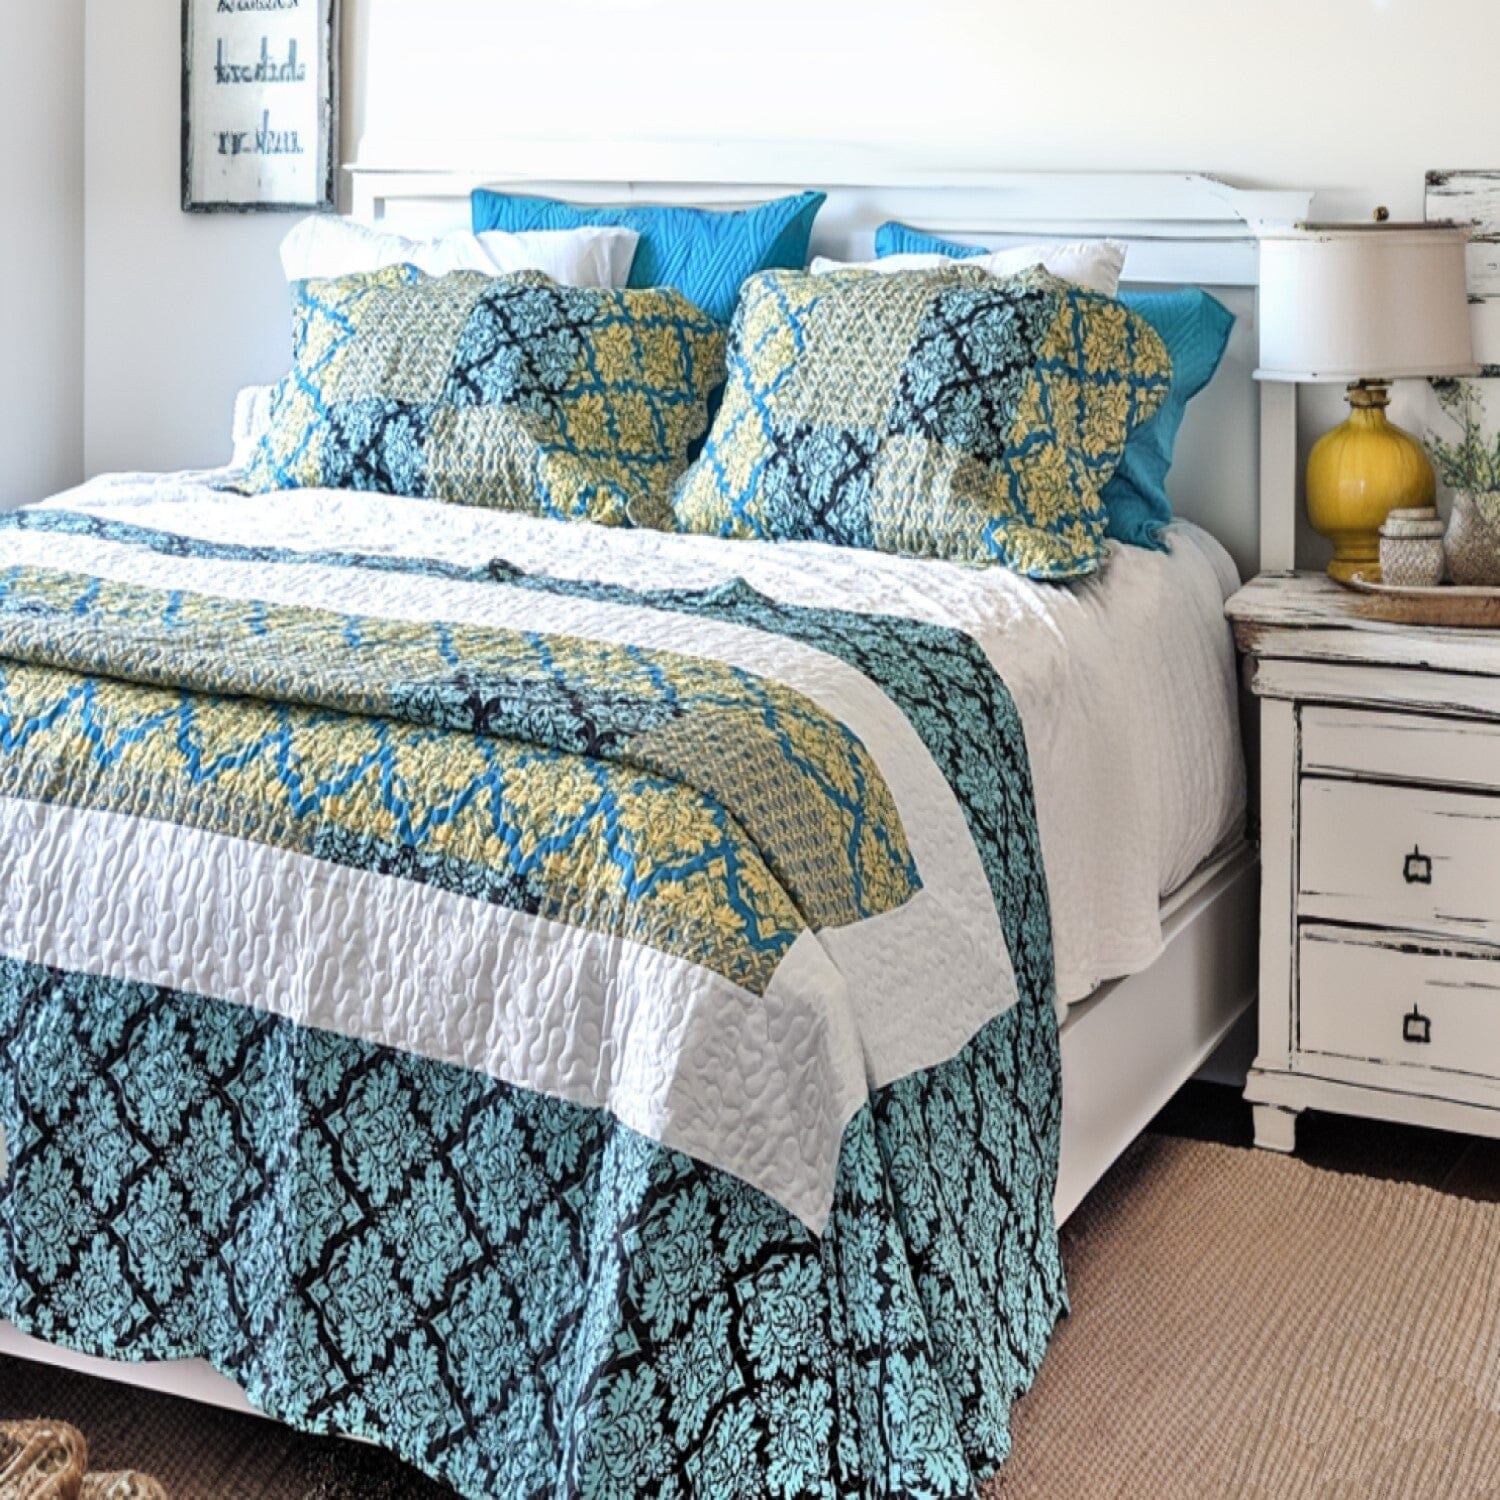 A quilt set with a damask pattern in teal, turquoise, and blue. The quilt is made of 100% polyester and has a scalloped edge. The set includes a quilt, two shams, and a bed skirt. The quilt is machine-washable and tumble-dryable.  The quilt set would be a great addition to any bedroom. The damask pattern is elegant and sophisticated, while the teal, turquoise, and blue colors are vibrant and inviting. The quilt set is also comfortable and cozy, making it perfect for a good night's sleep.